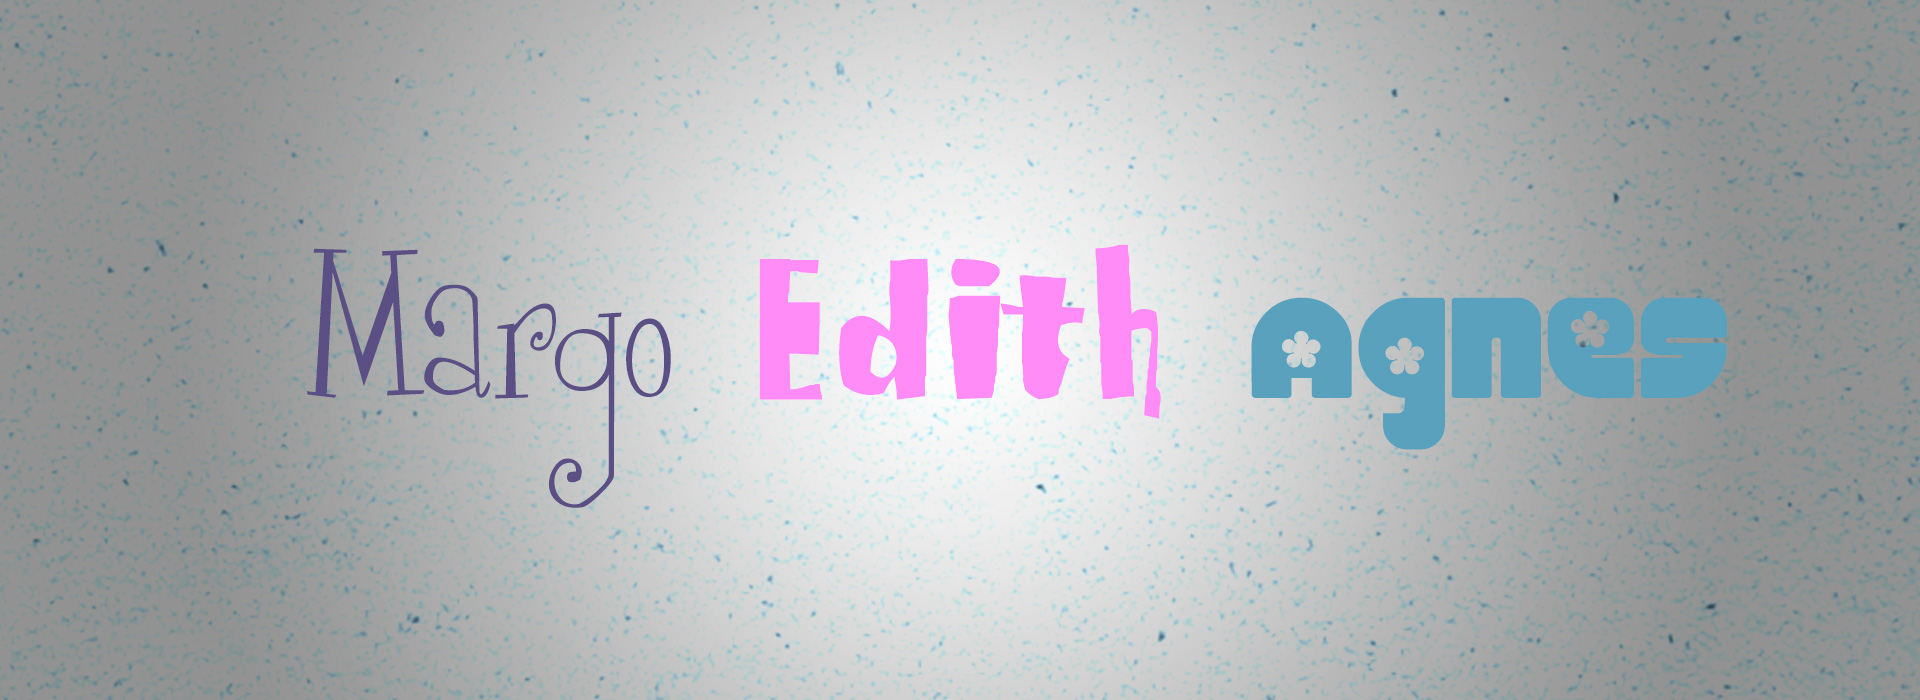 Margo, Edith and Agnes' names in their own font style